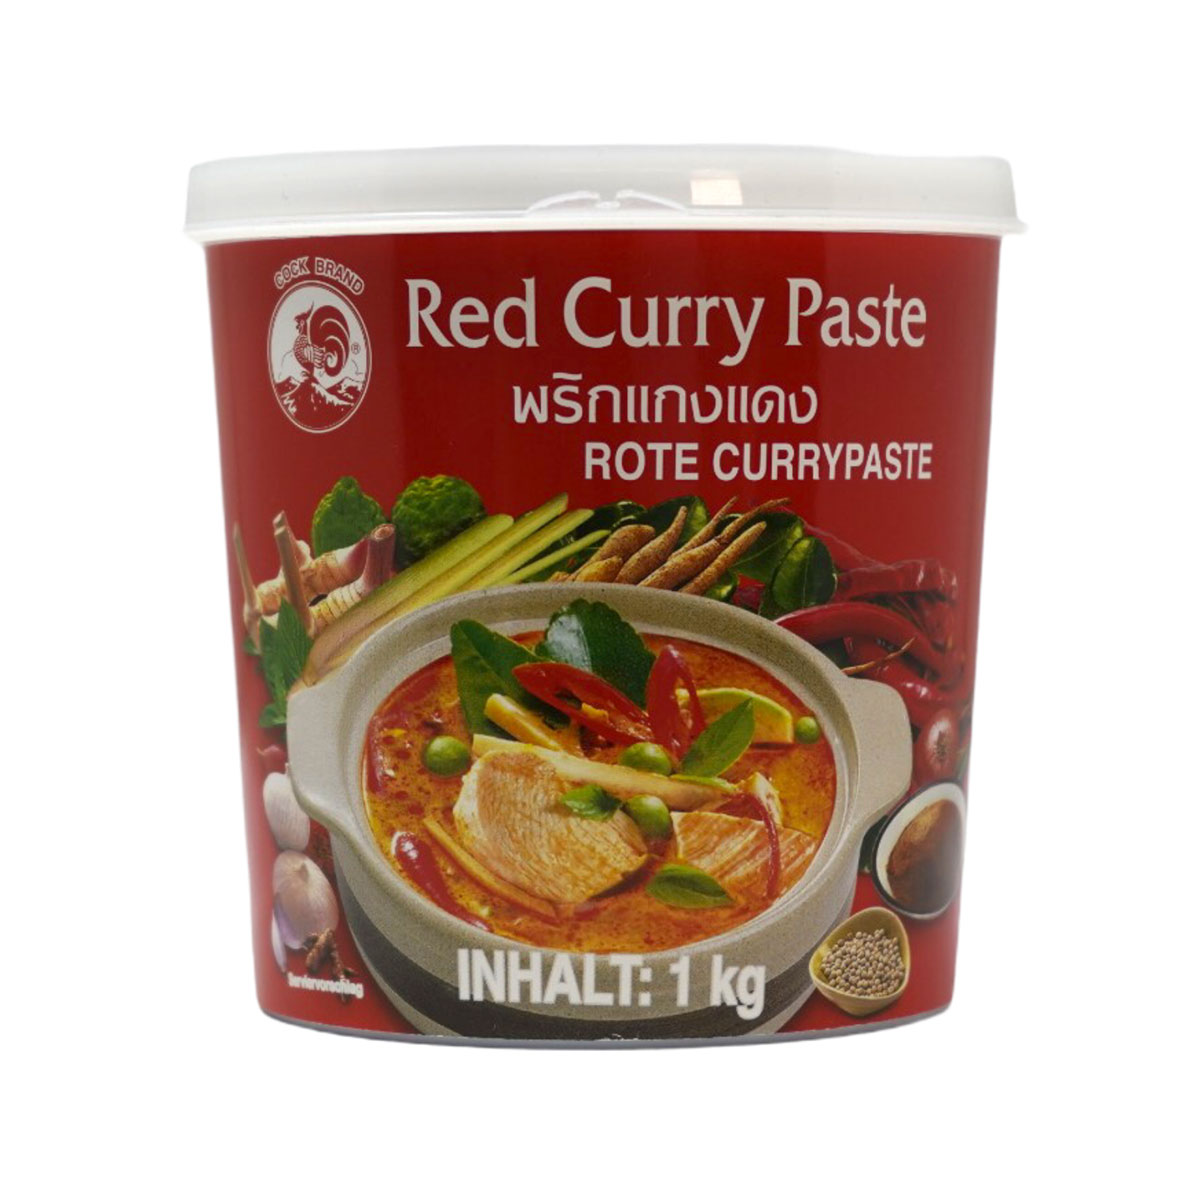 Rote Currypaste 1kg